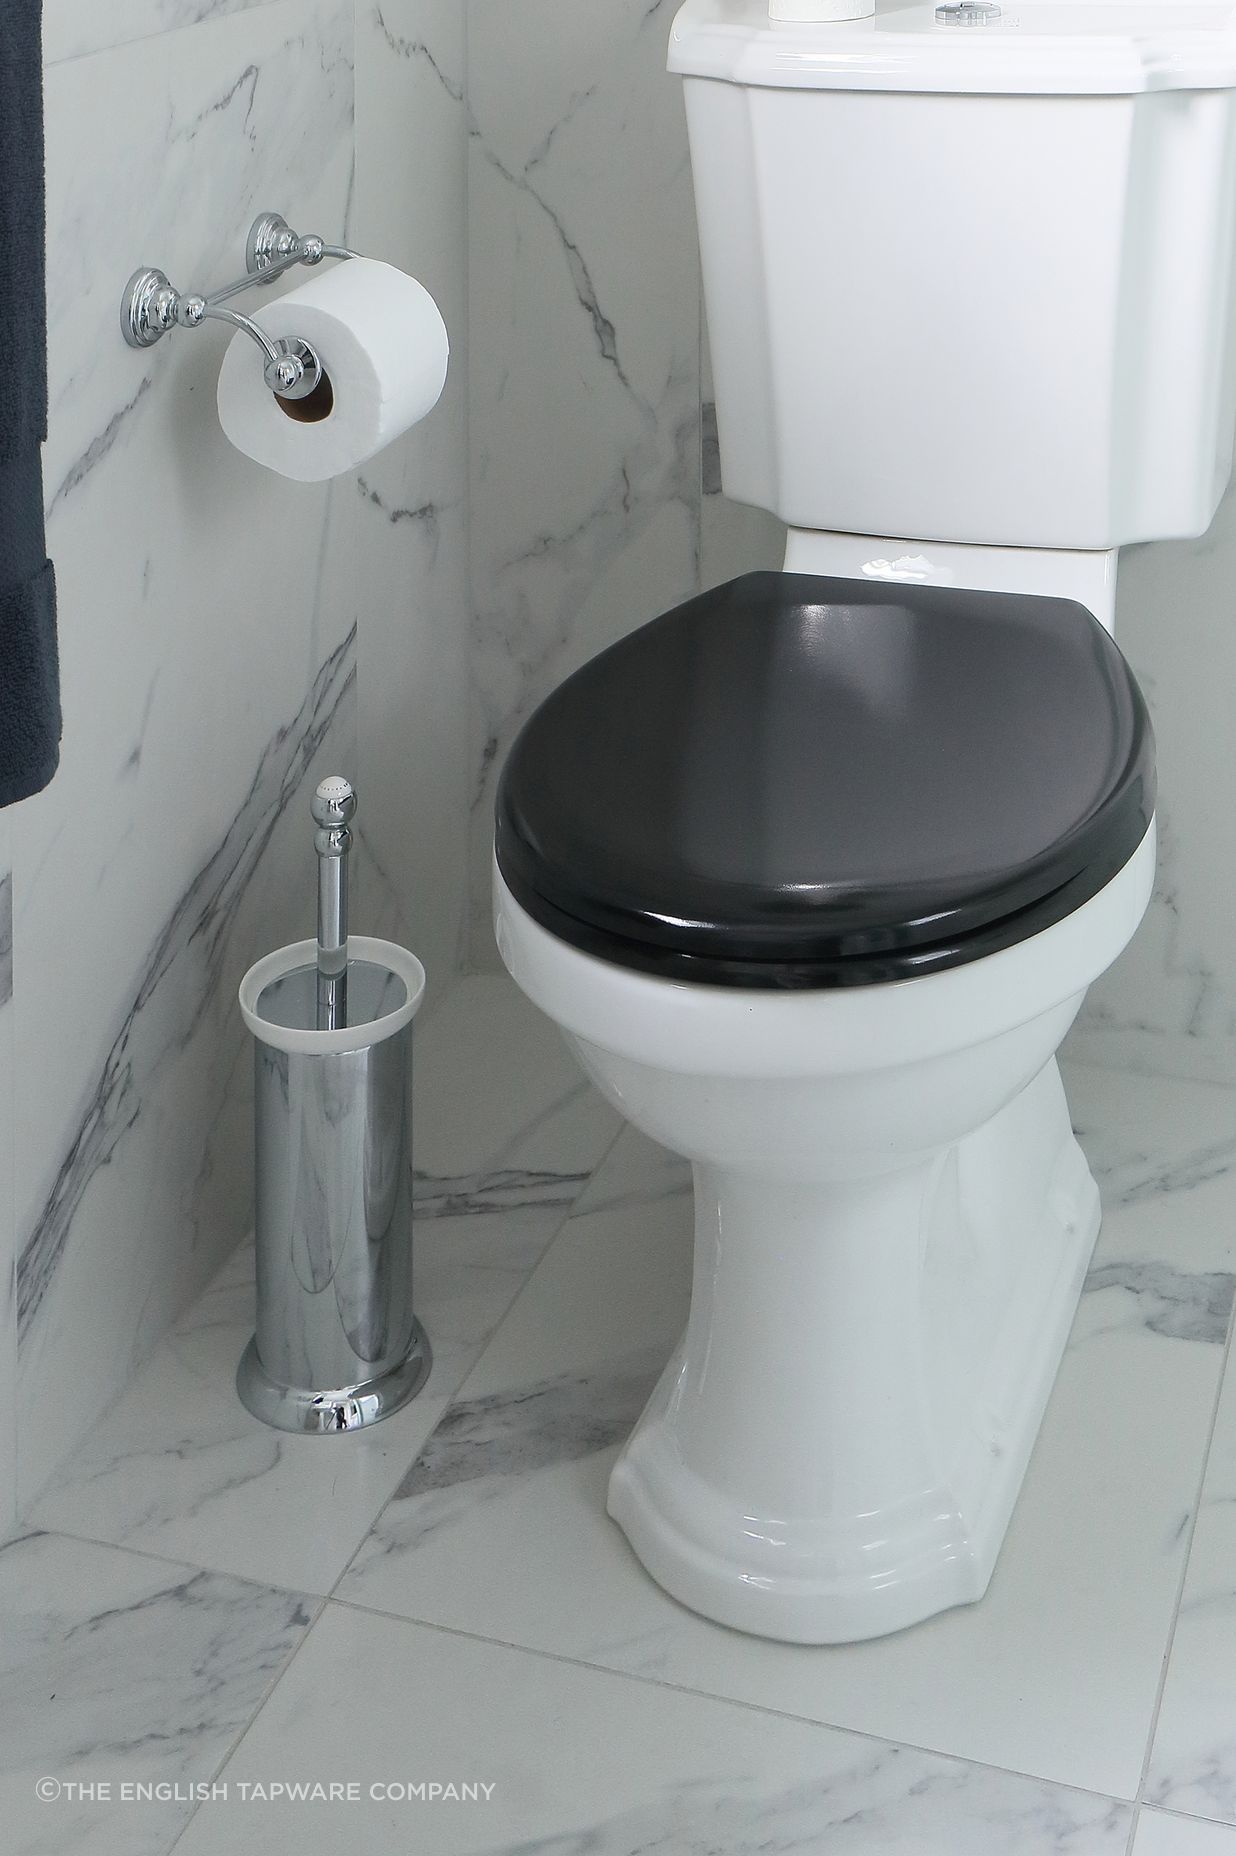 Toilet brush holders and toilet roll holders can be made of the same material.